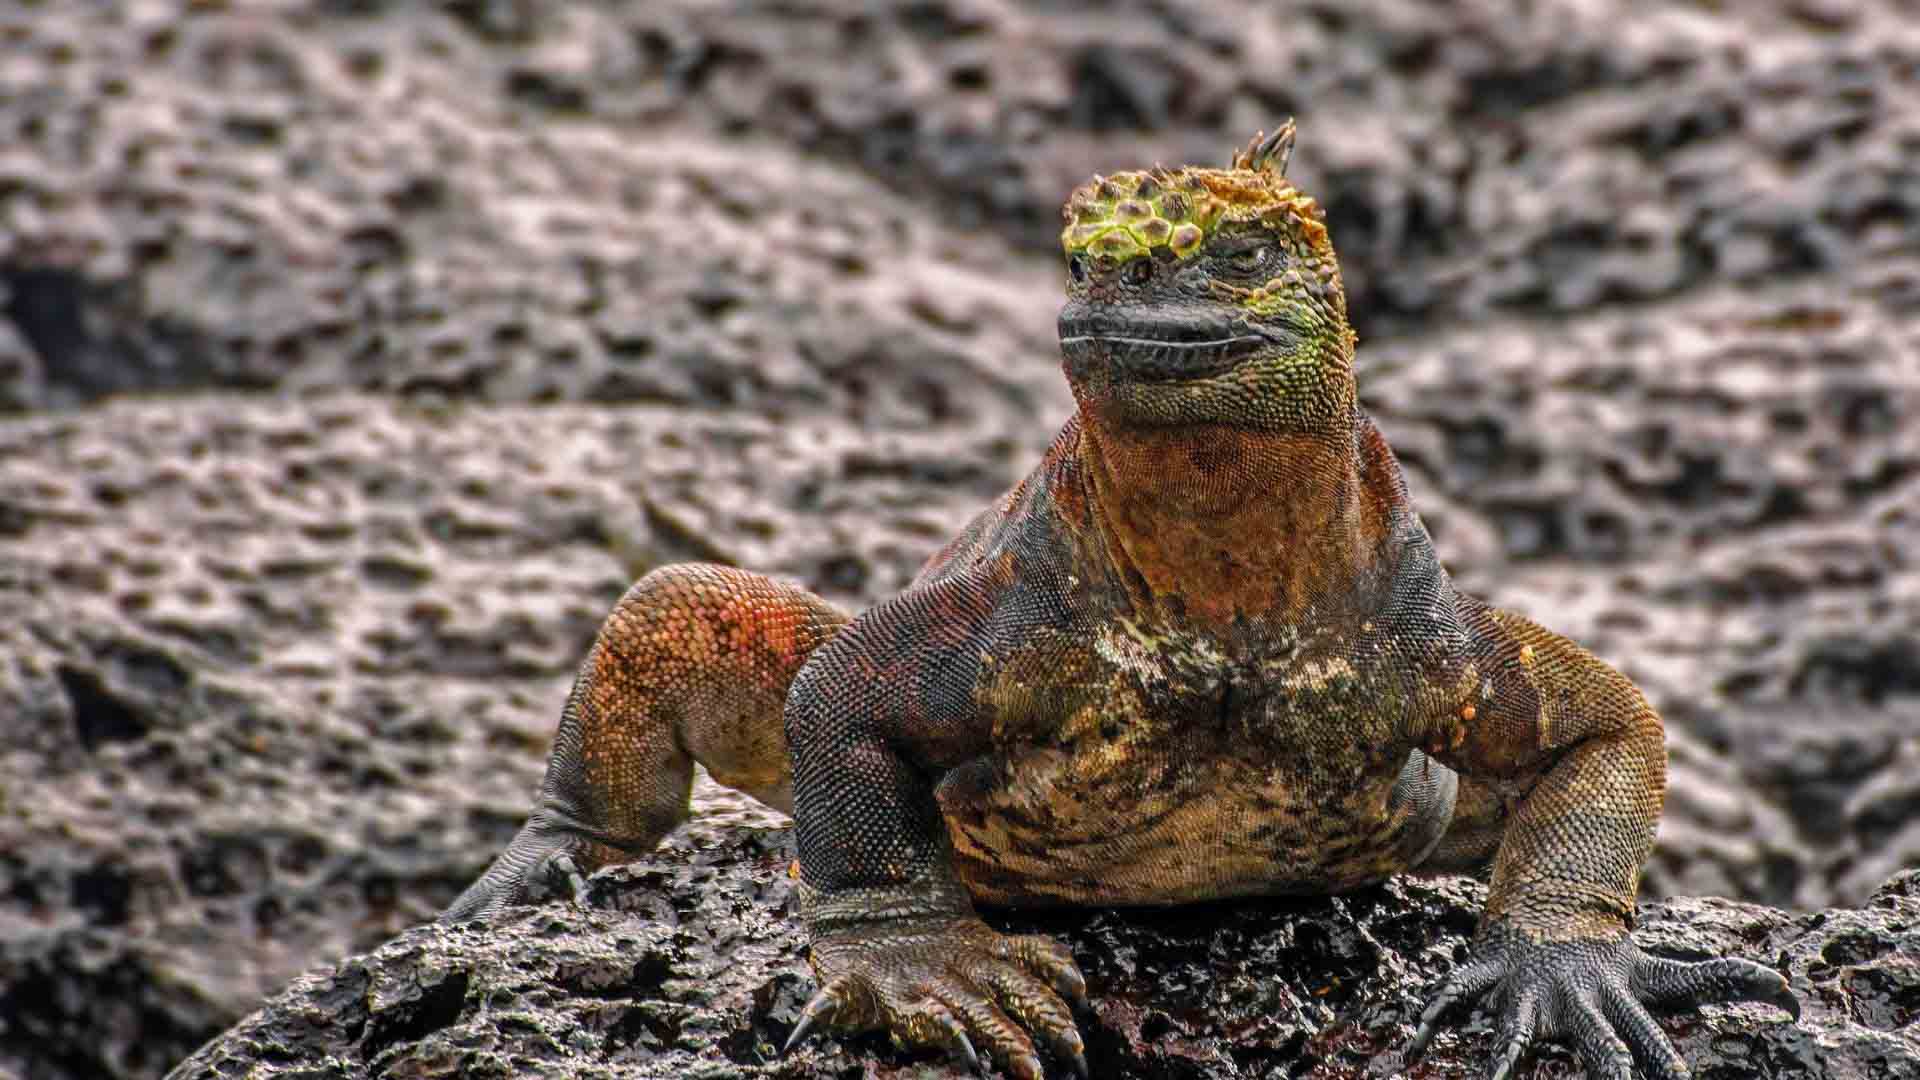 4 night boat tour visiting 5 islands in the Galapagos archipelago 